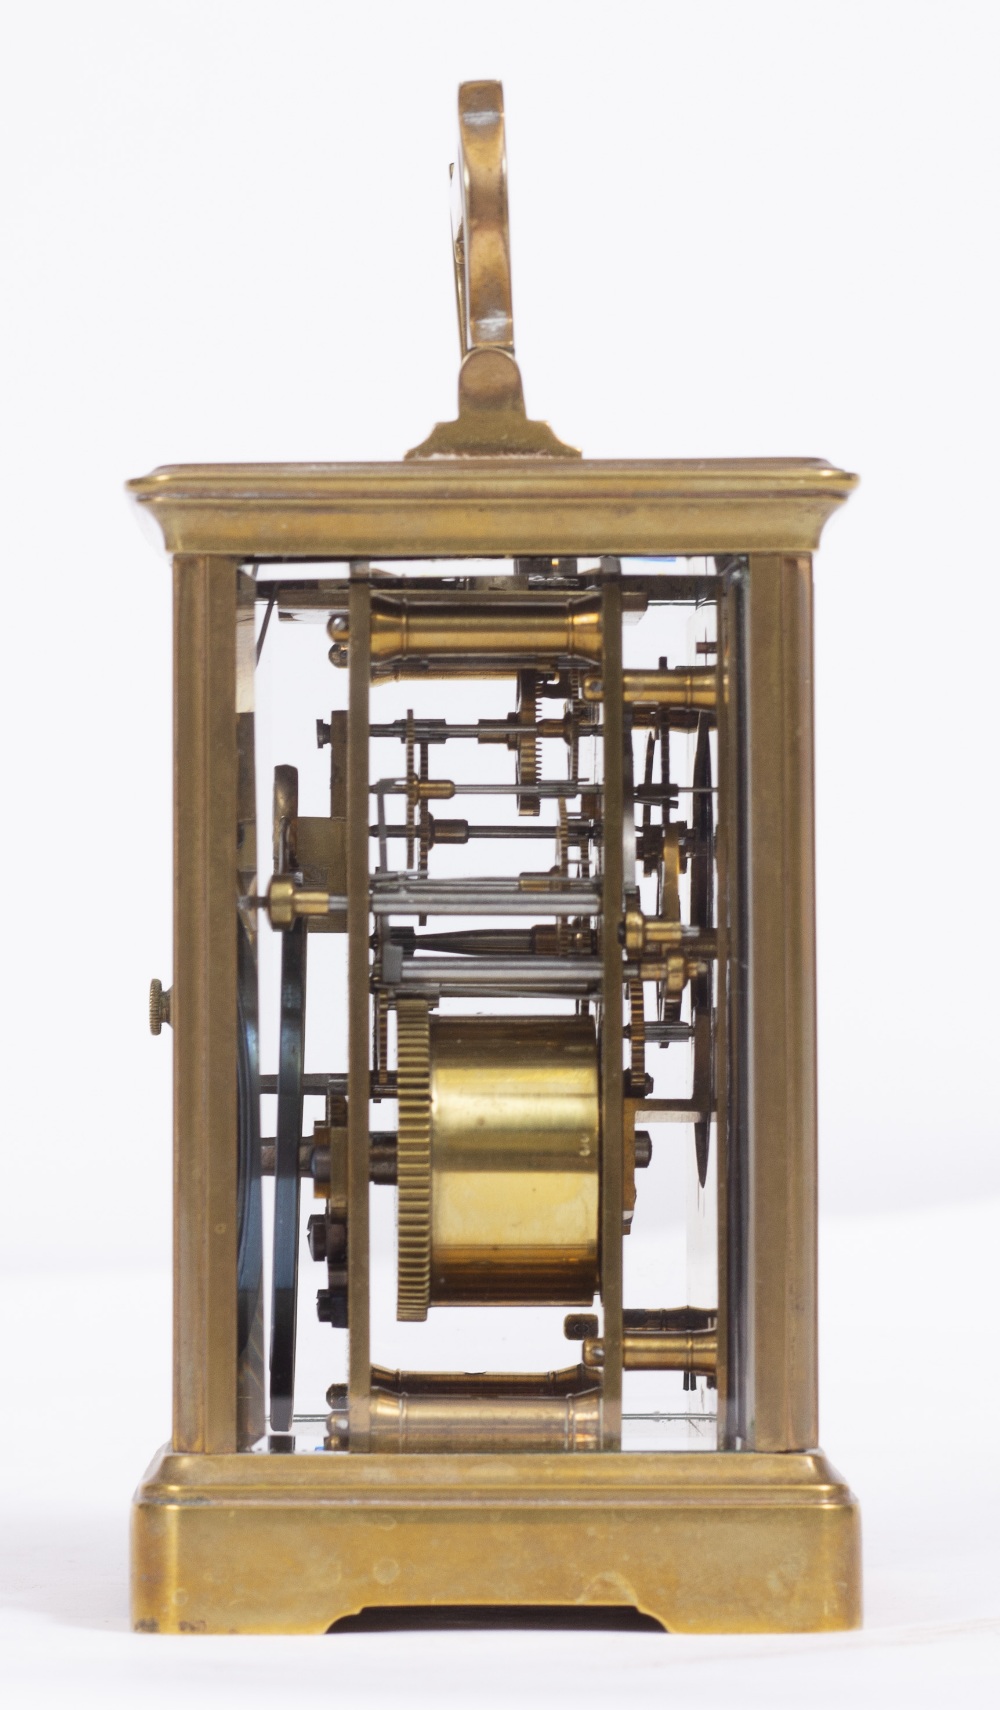 A BRASS CARRIAGE CLOCK, with enamel dial, striking the hours and half hours in a gong, 17cm high - Image 4 of 5